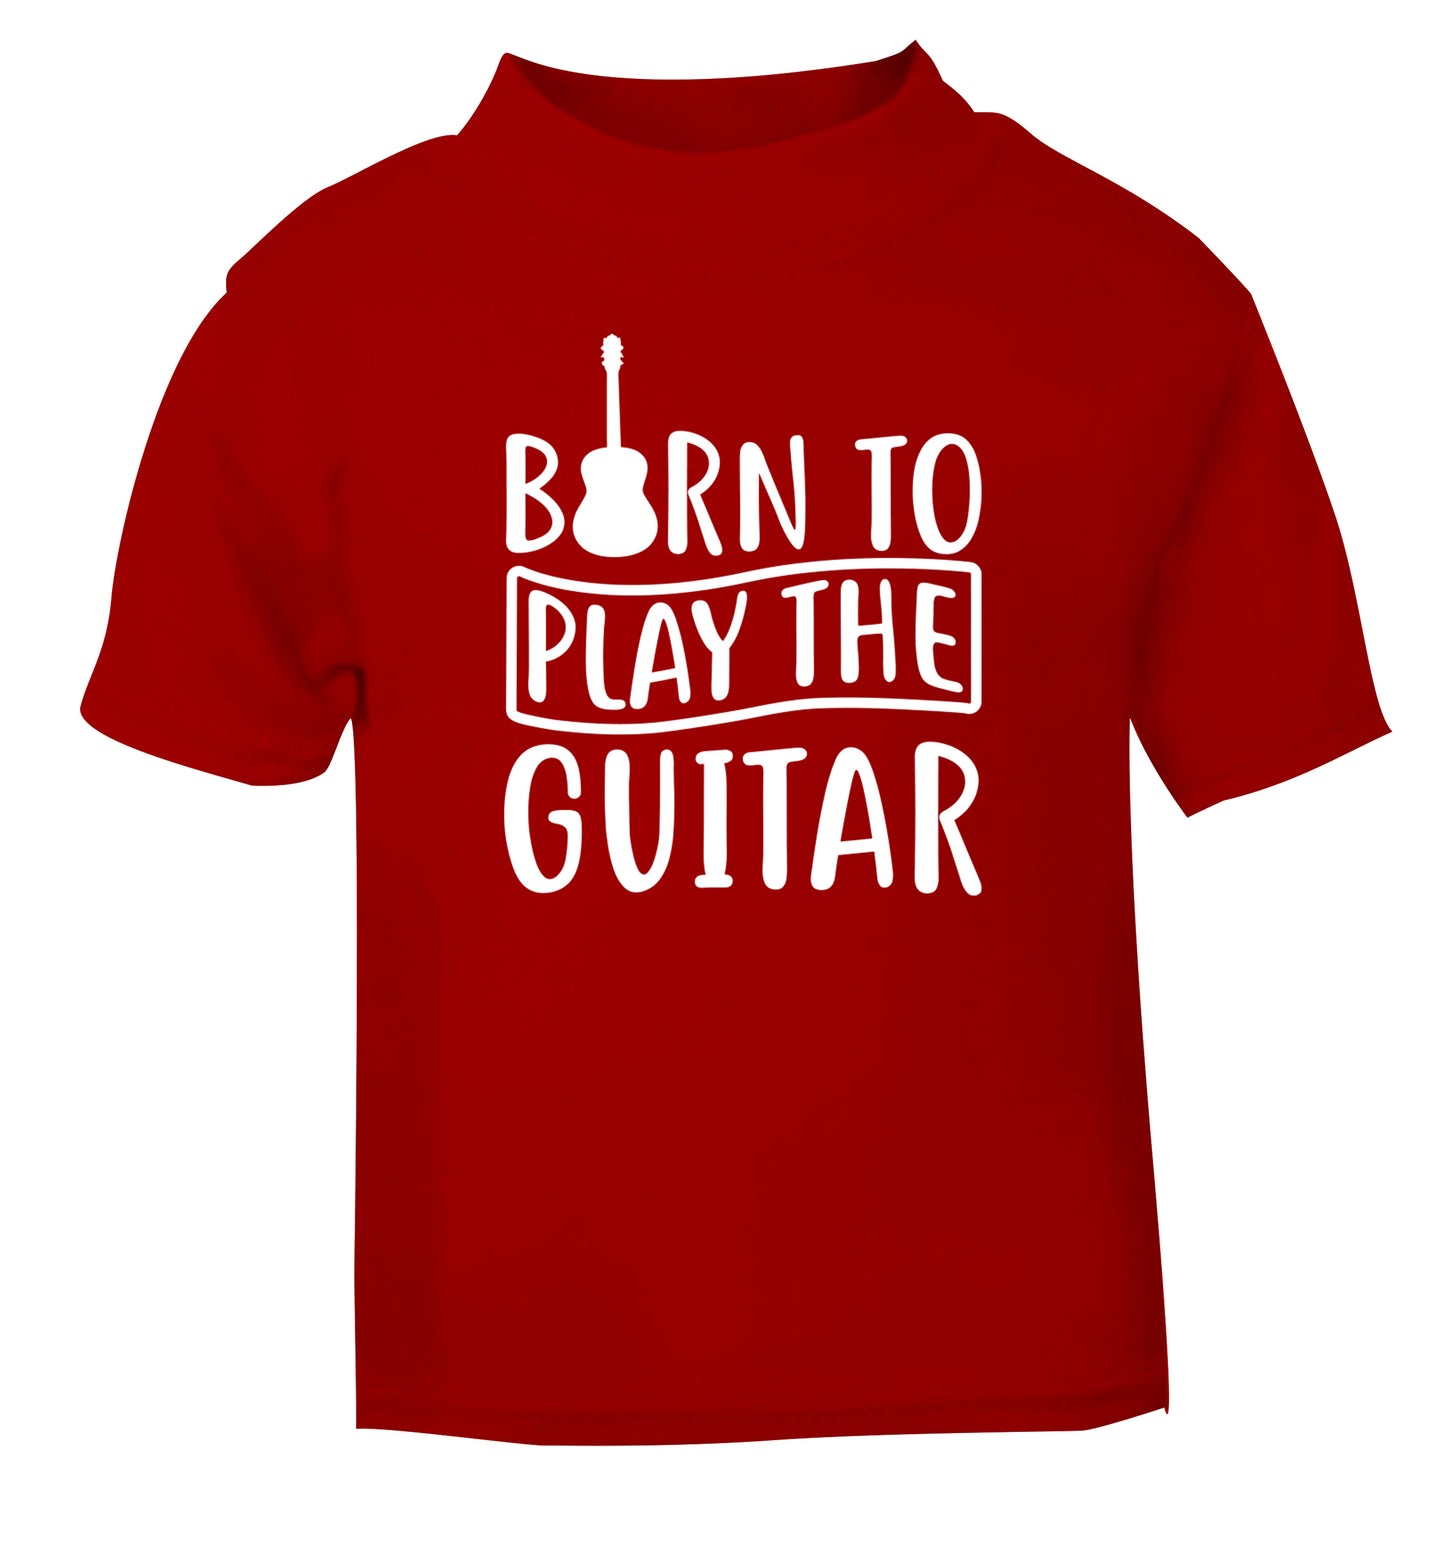 Born to play the guitar red Baby Toddler Tshirt 2 Years